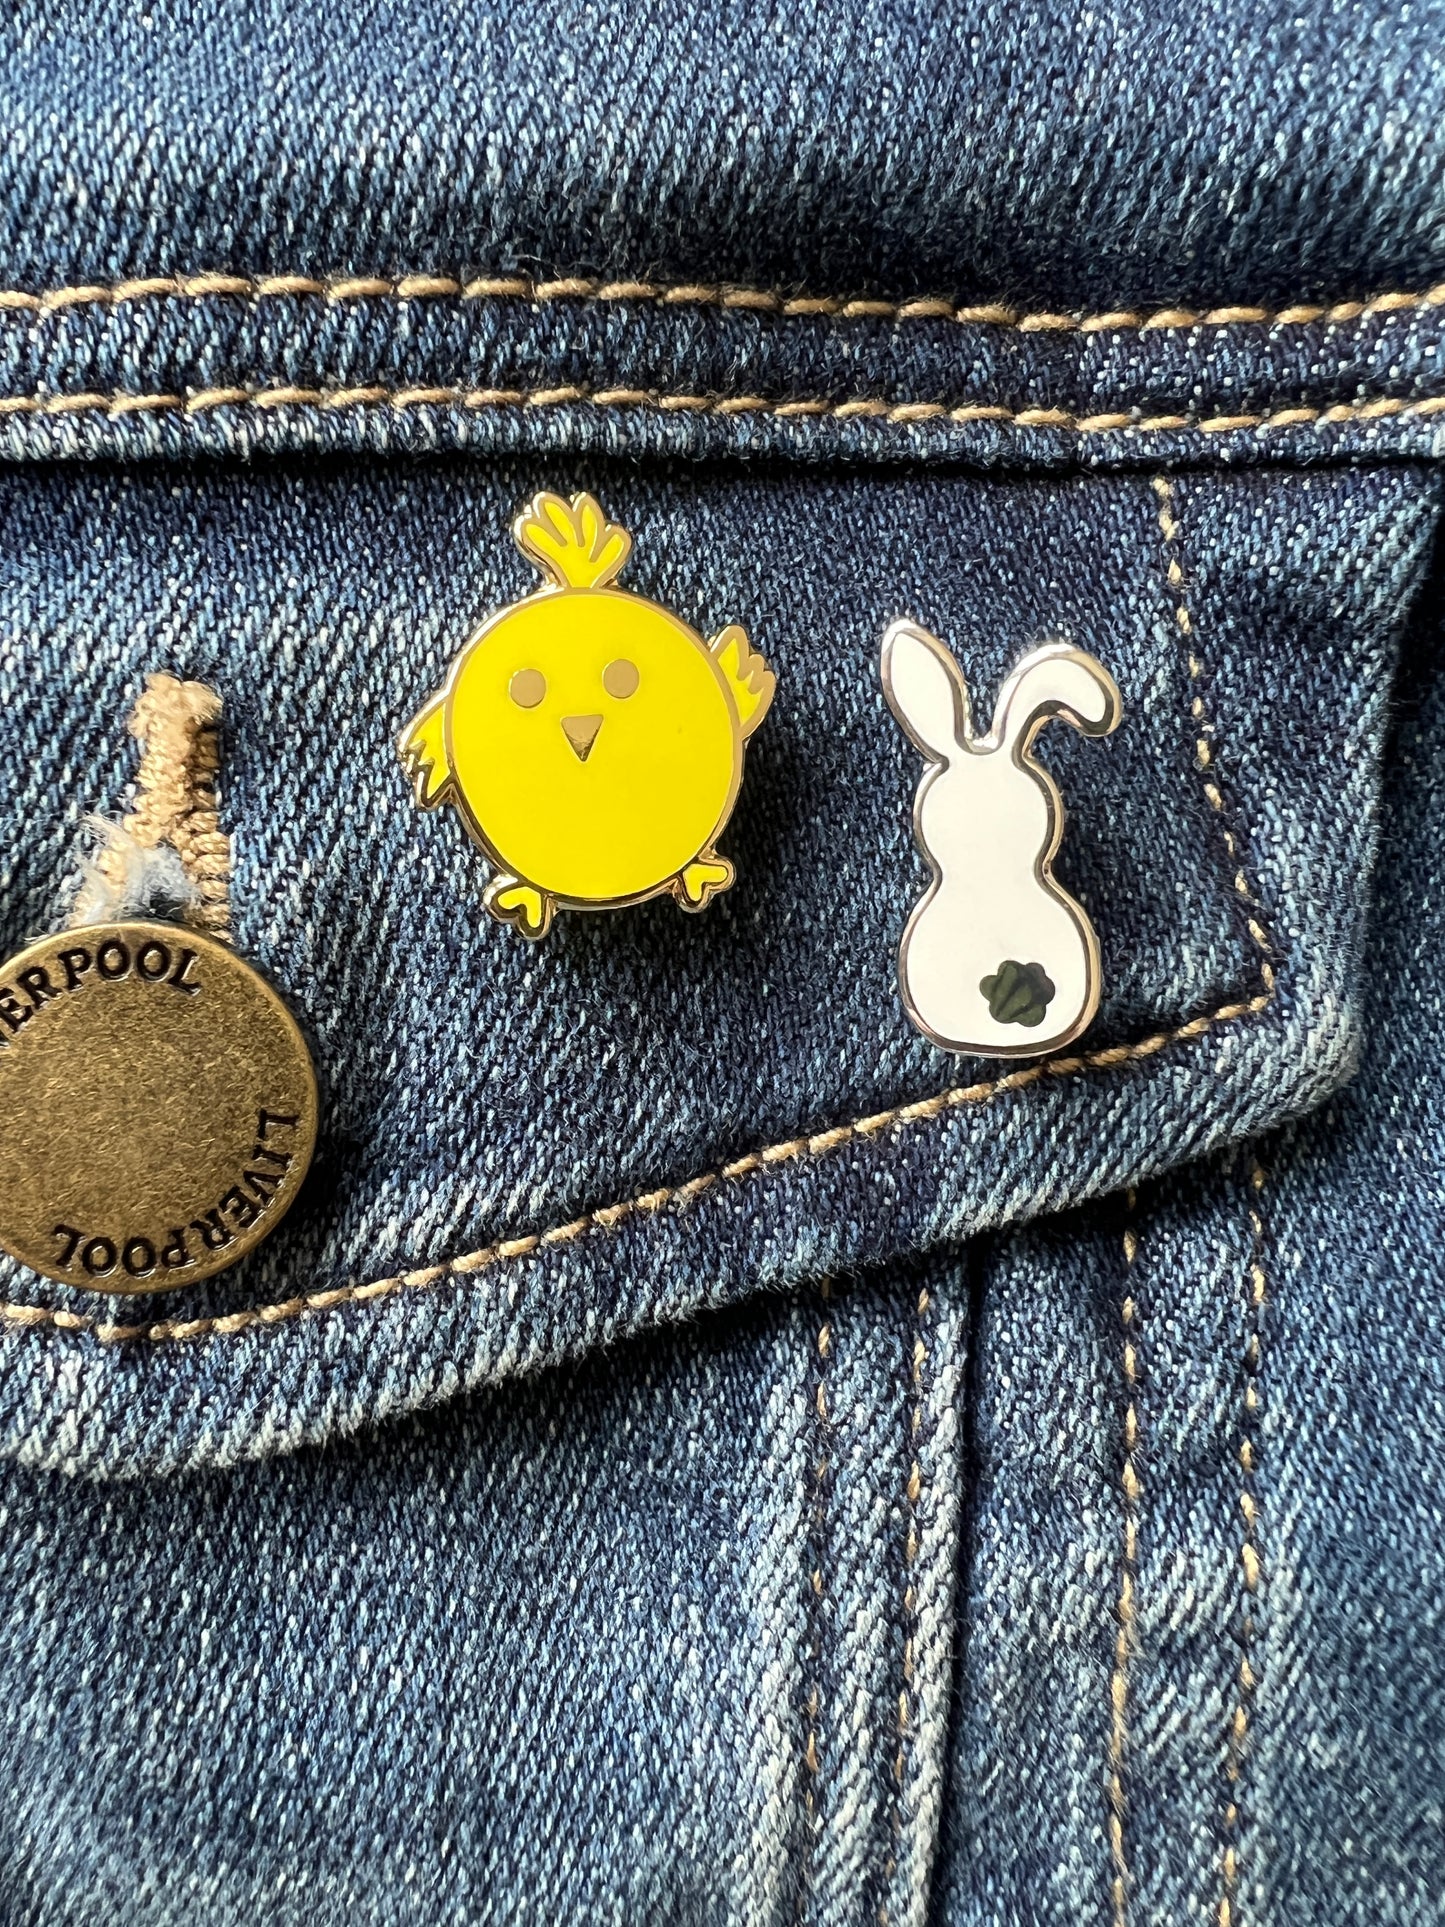 Easter Bunny or Chick Enamel Pin Badge